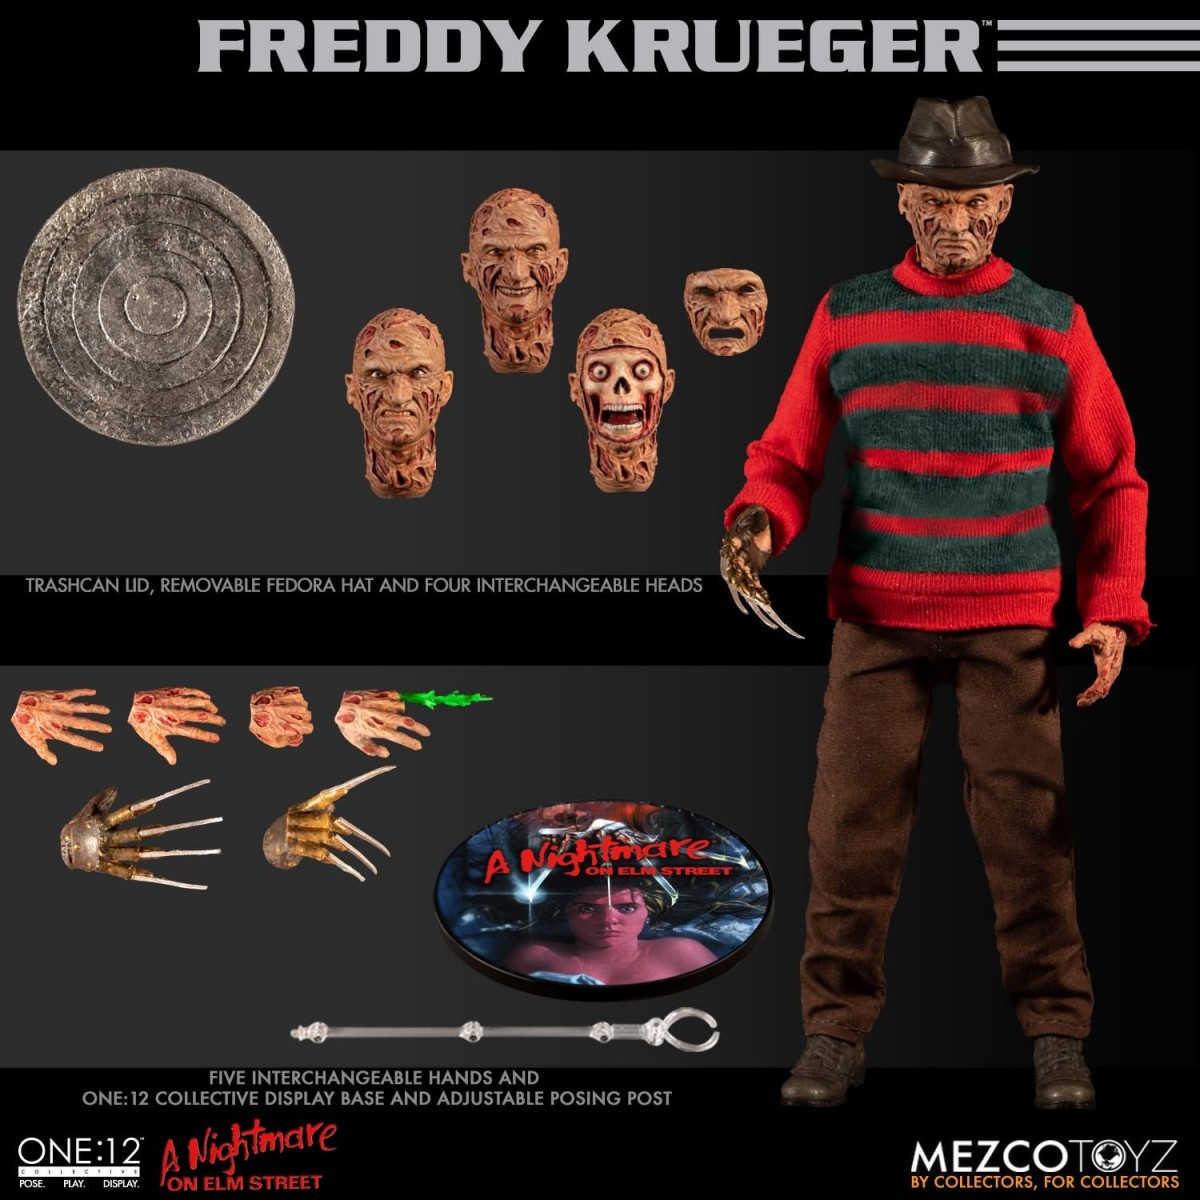 ONE12 COLLECTIVE A Nightmare on Elm Street Freddy Krueger